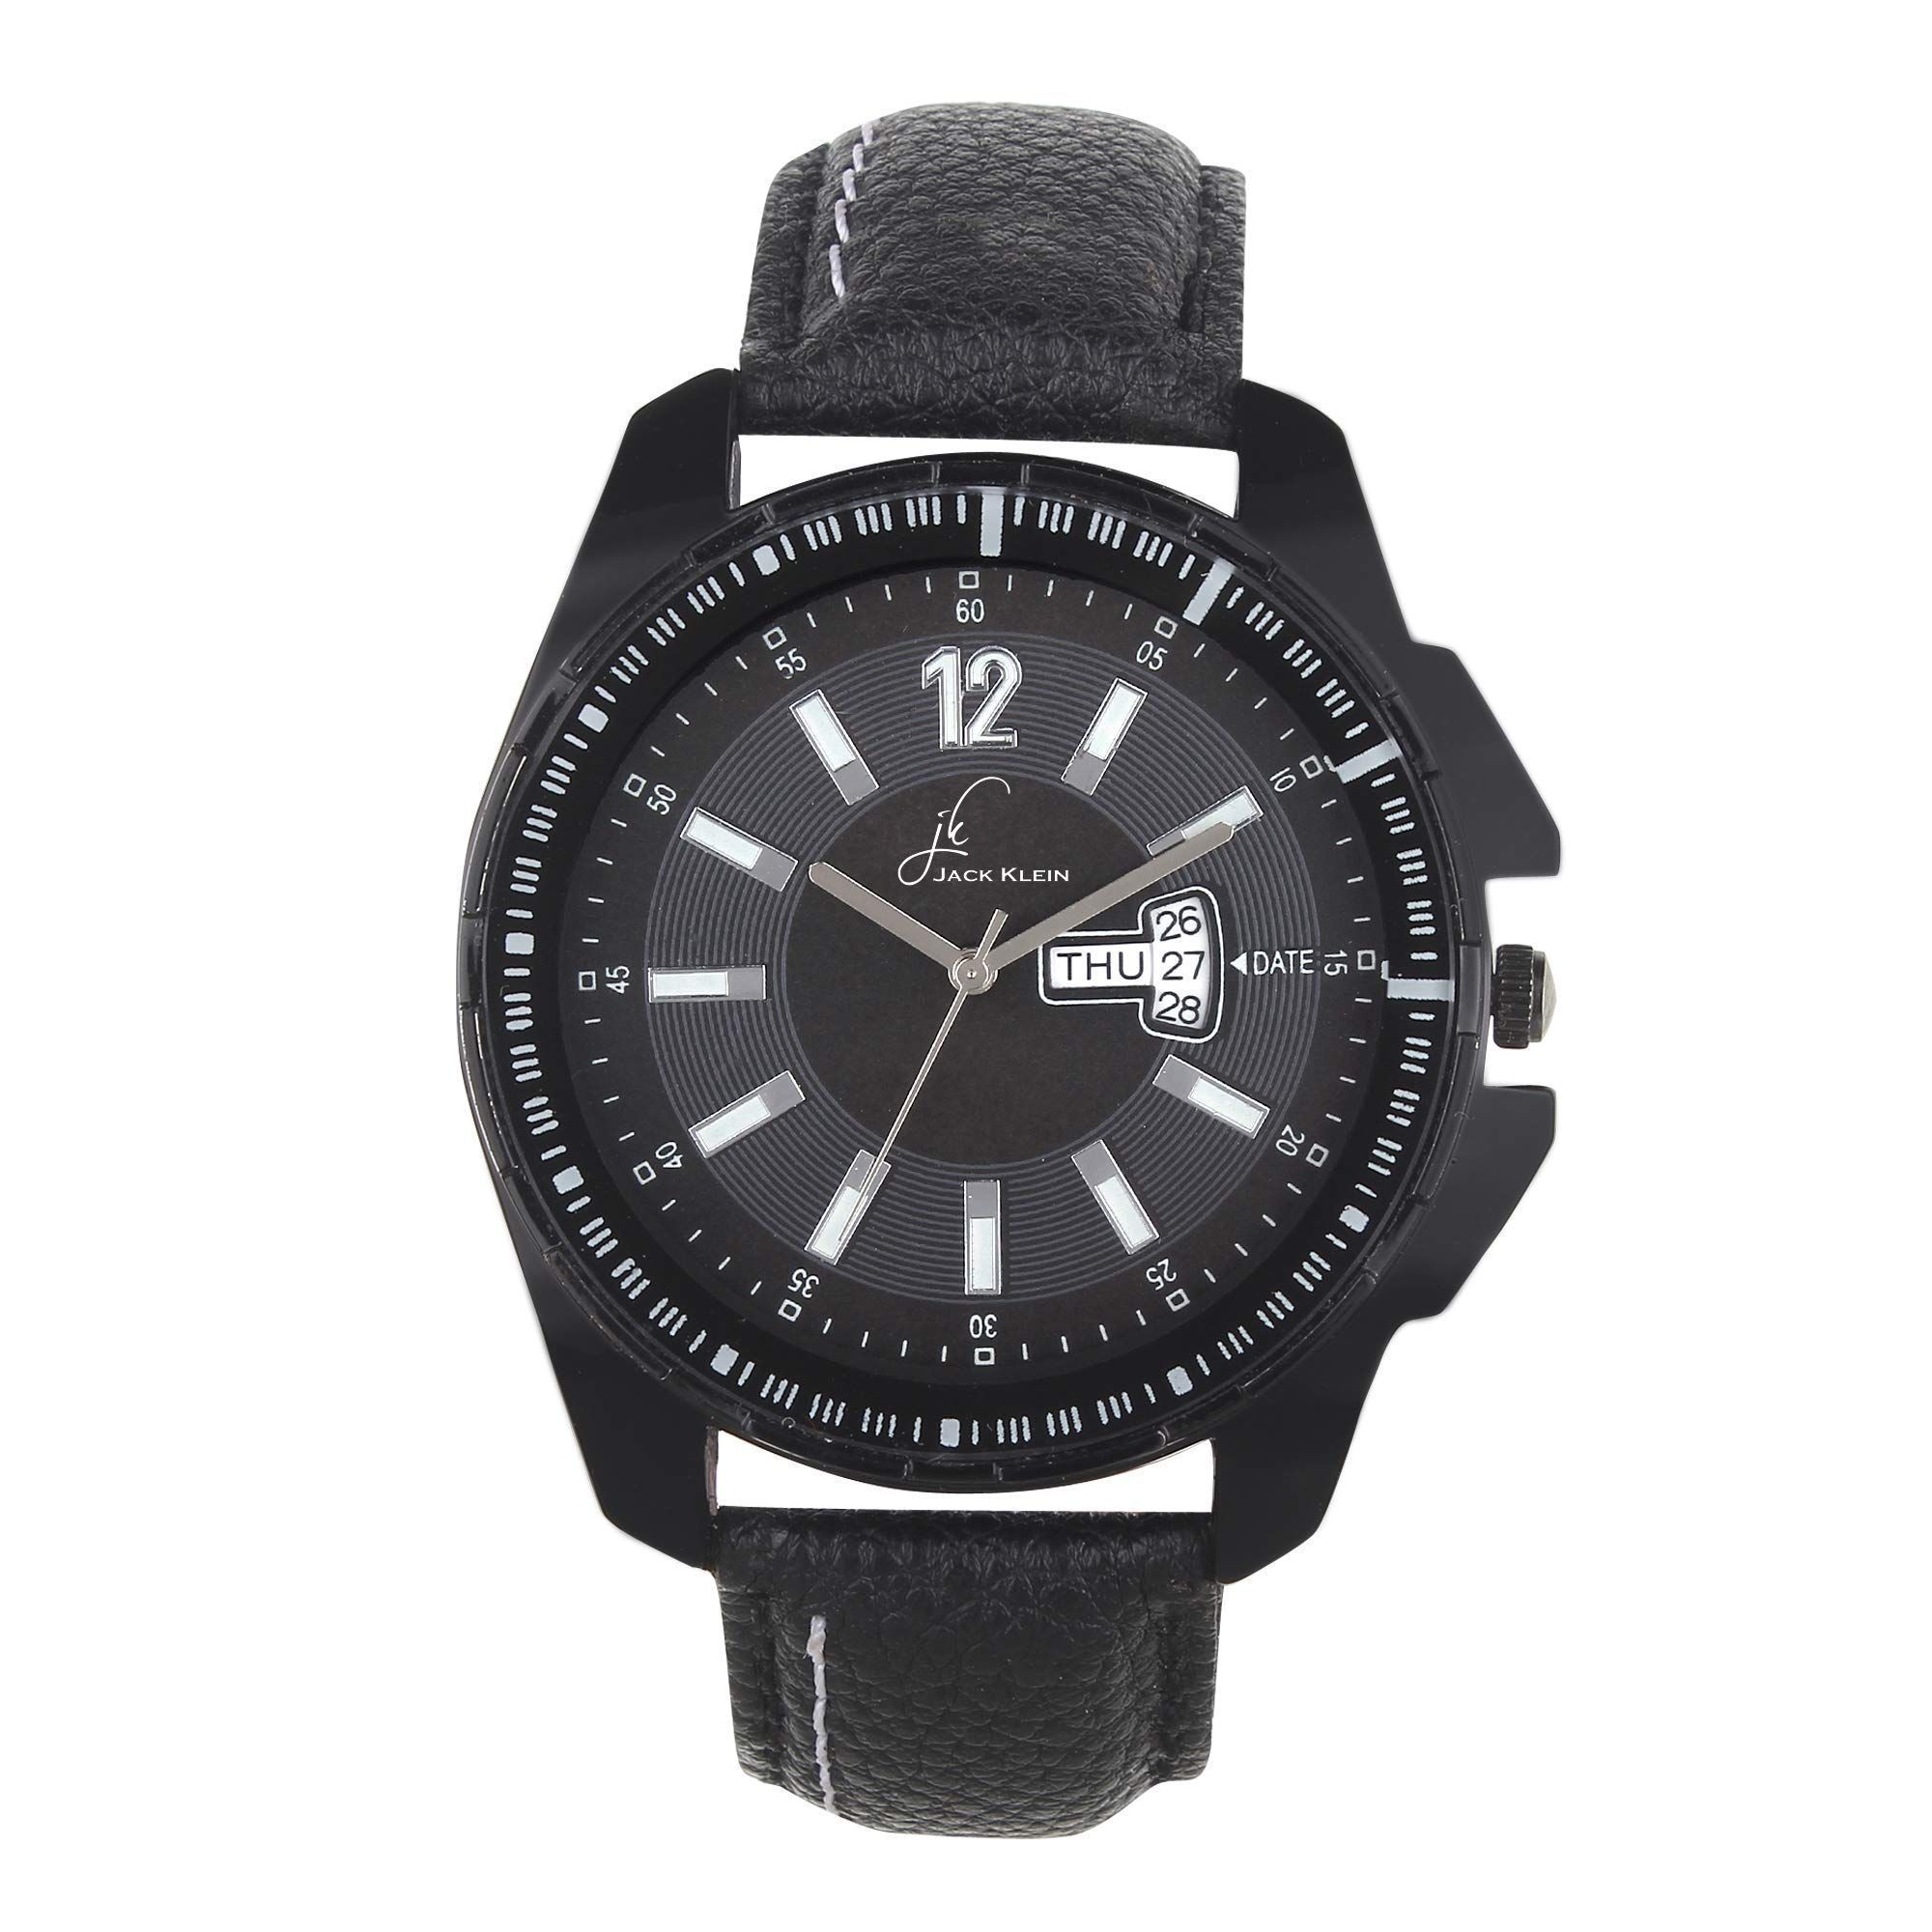 Trendy Black Dial Day and Date Working Multi Function Wrist Watch